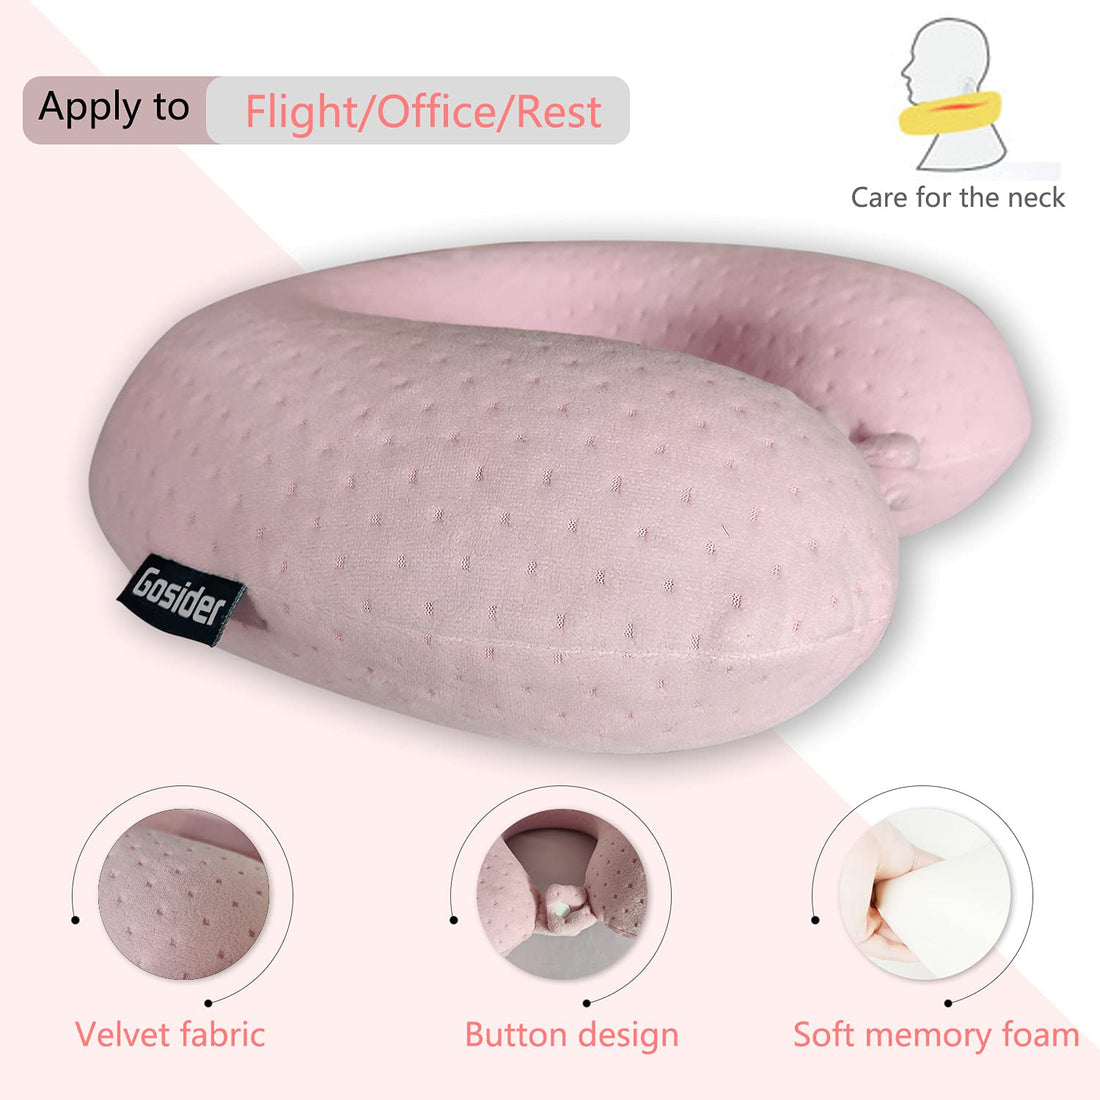 Neck Pillow for Travel - Memory Foam, Comfortable & Breathable Soft U Shaped Pillows Neck & Head Support Relieve Fatigue, Portable U Pillows for Air Travel, Machine Washable (Pink)